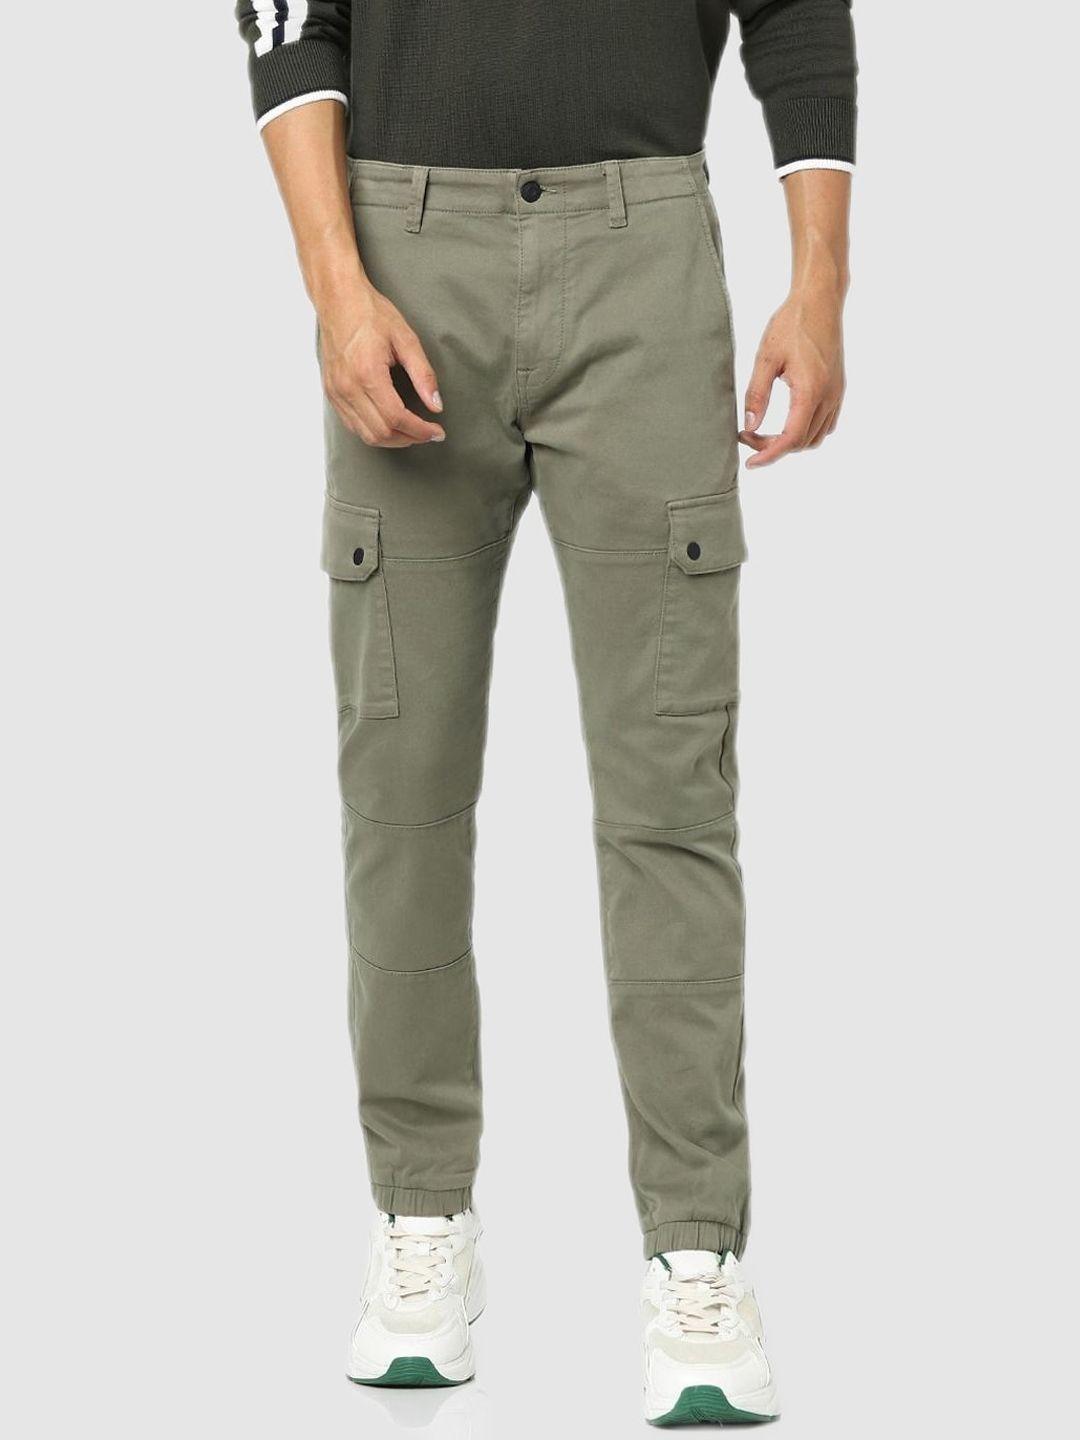 celio-men-olive-green-classic-regular-fit-solid-joggers-trousers